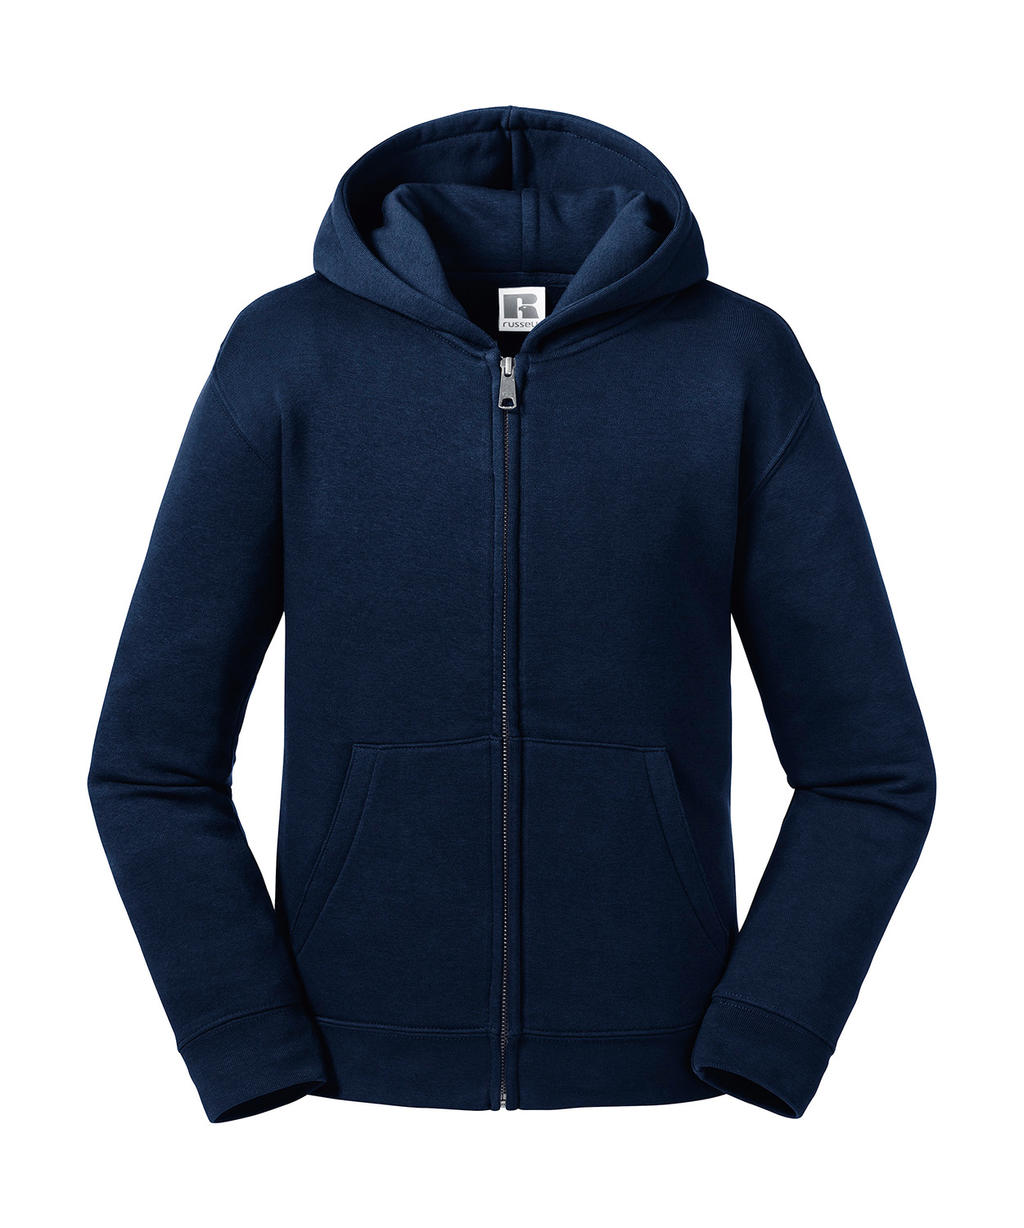  Kids Authentic Zipped Hood Sweat in Farbe French Navy